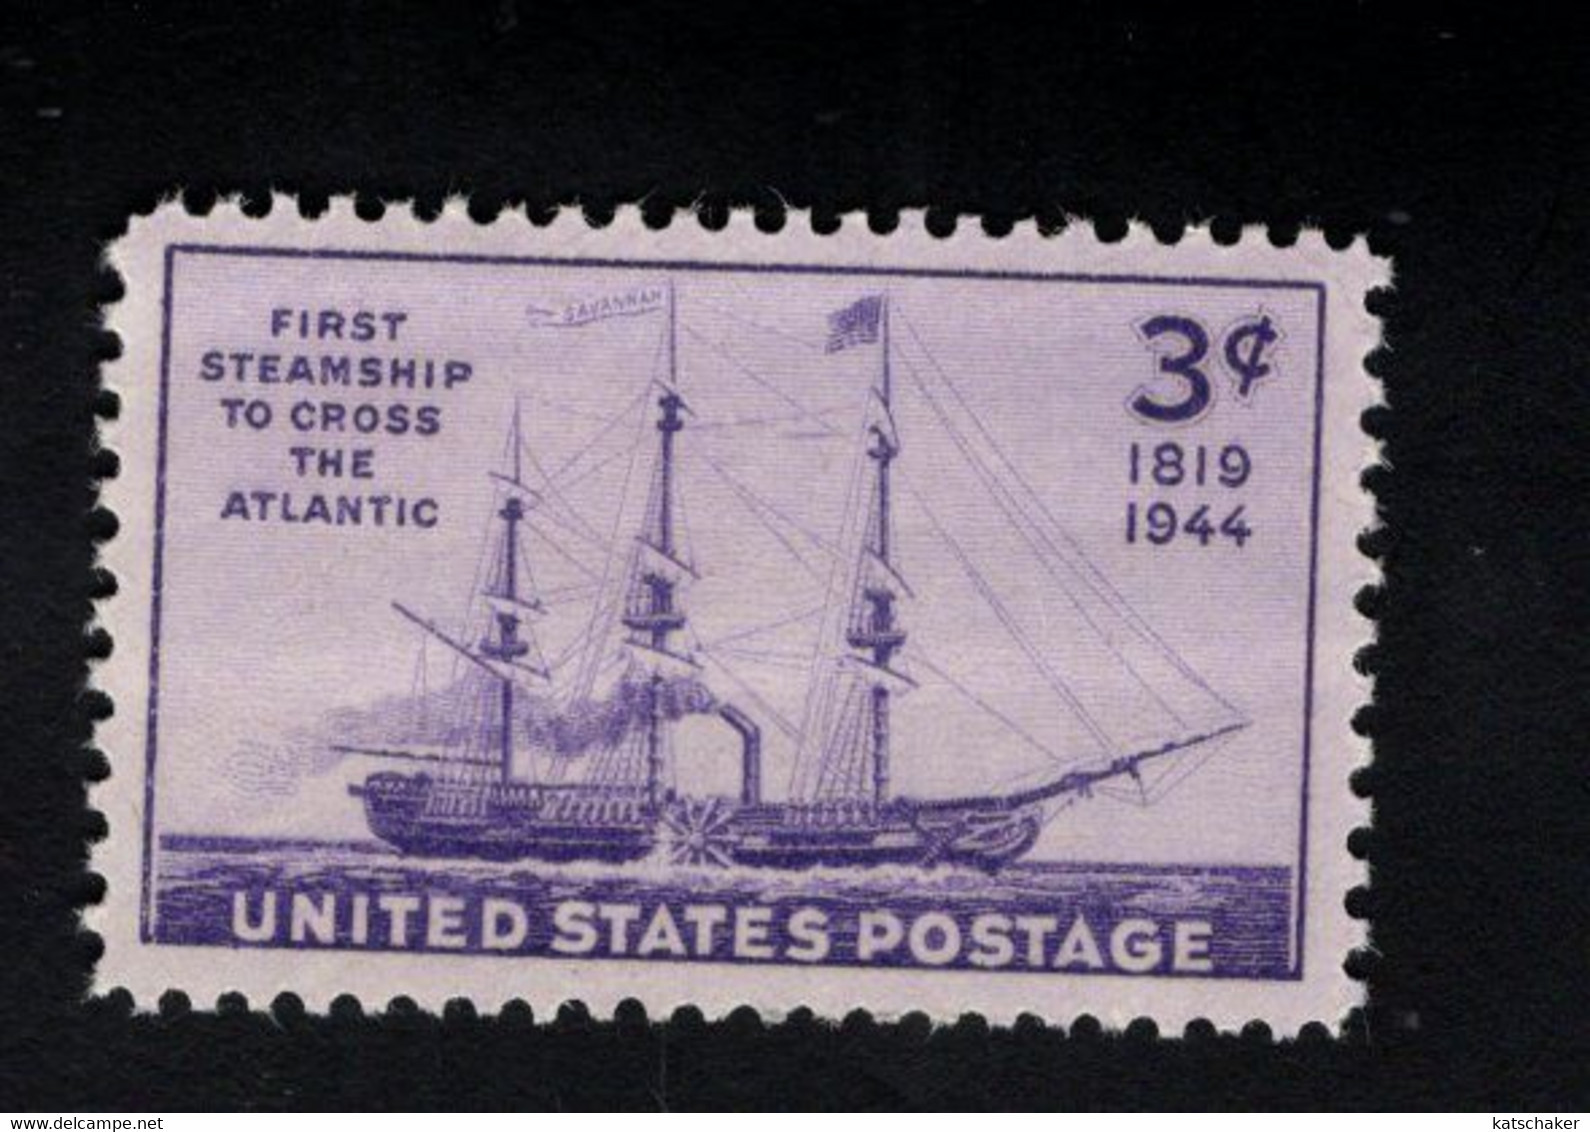 203705957 1944 SCOTT 923 (XX) POSTFRIS MINT NEVER HINGED  - Steampship - Unused Stamps